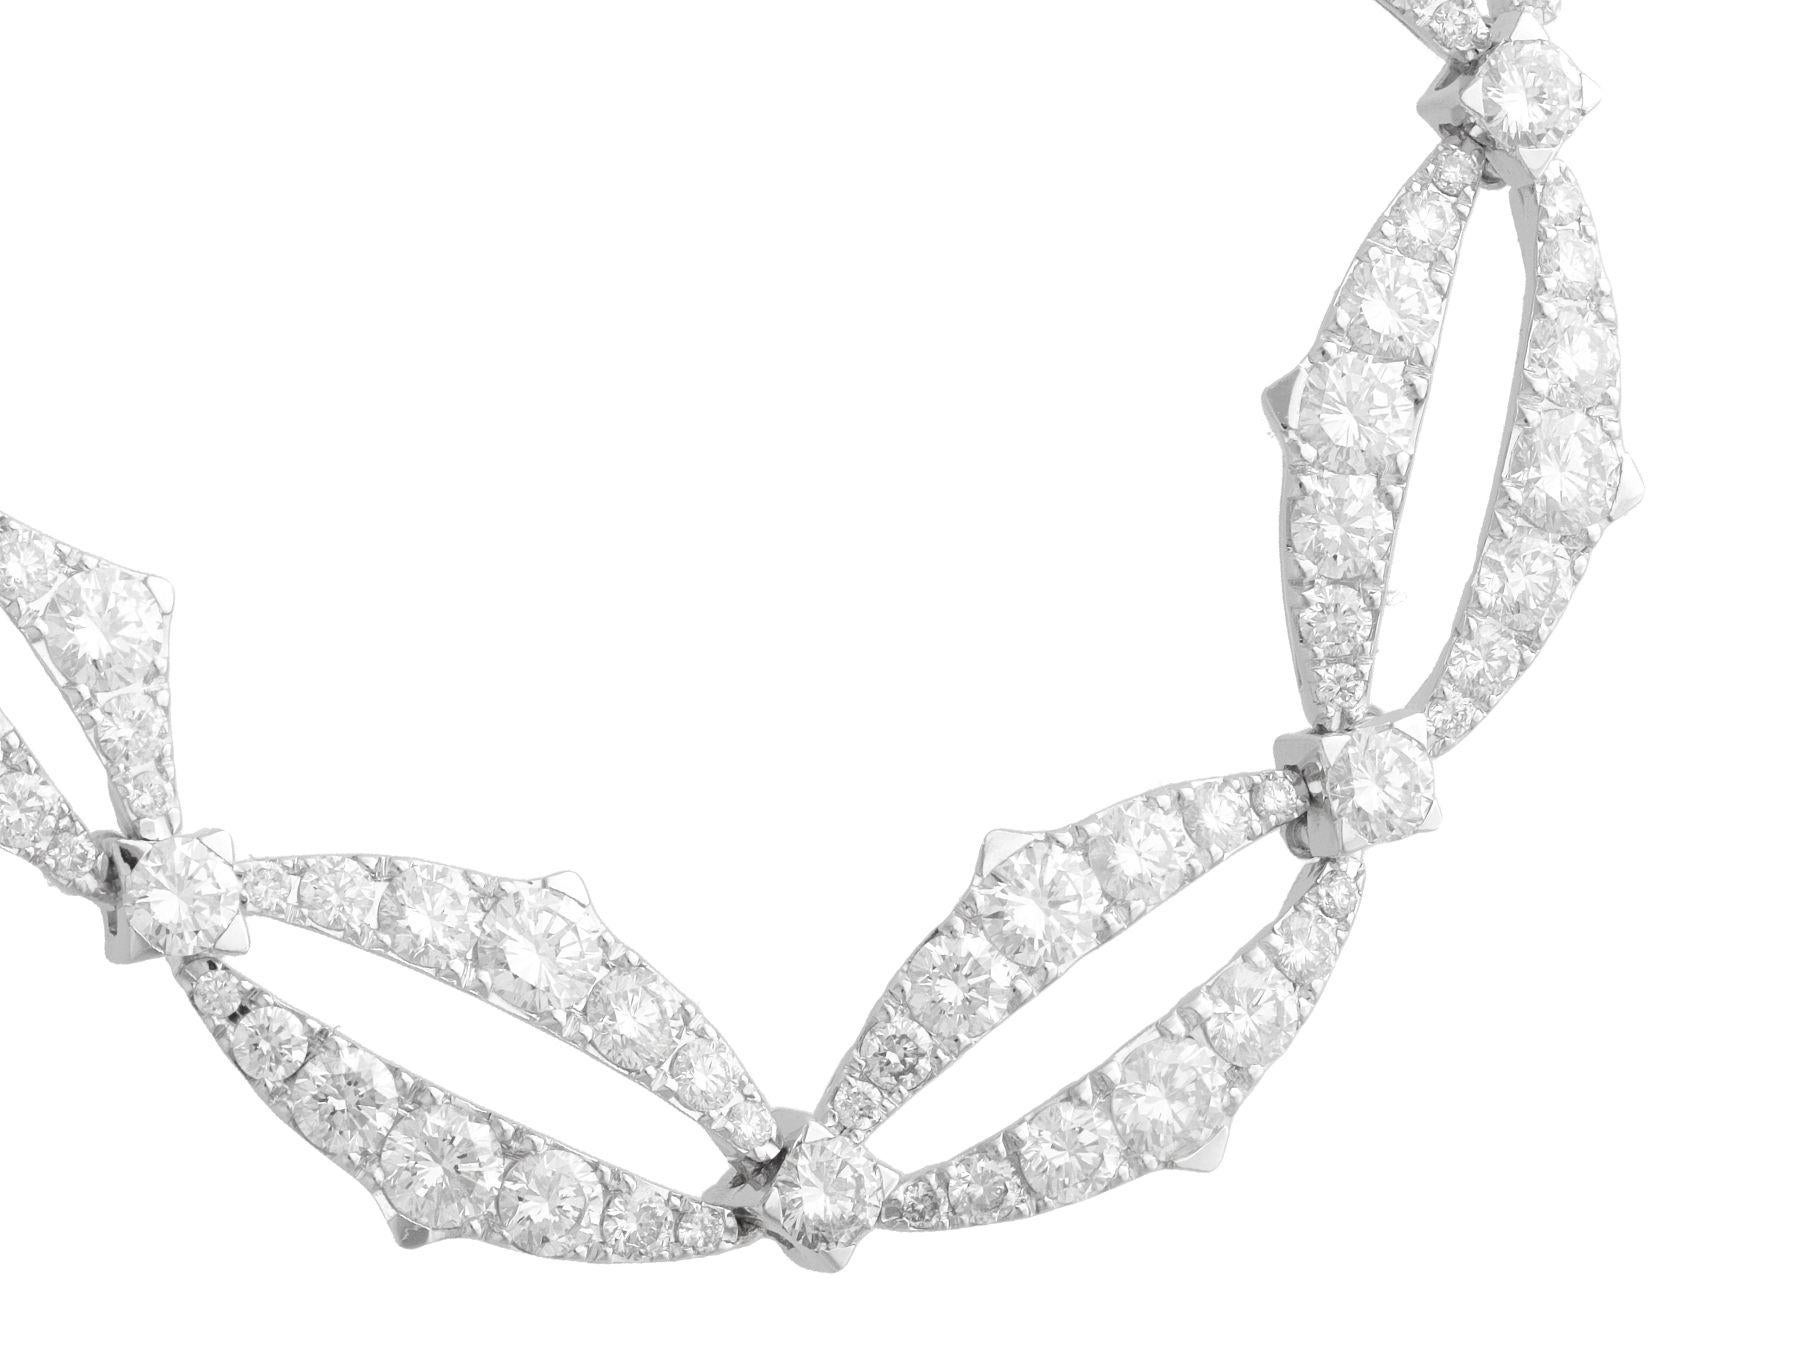 Contemporary 15.12 Carat Diamond and White Gold Necklace by Stephen Webster For Sale